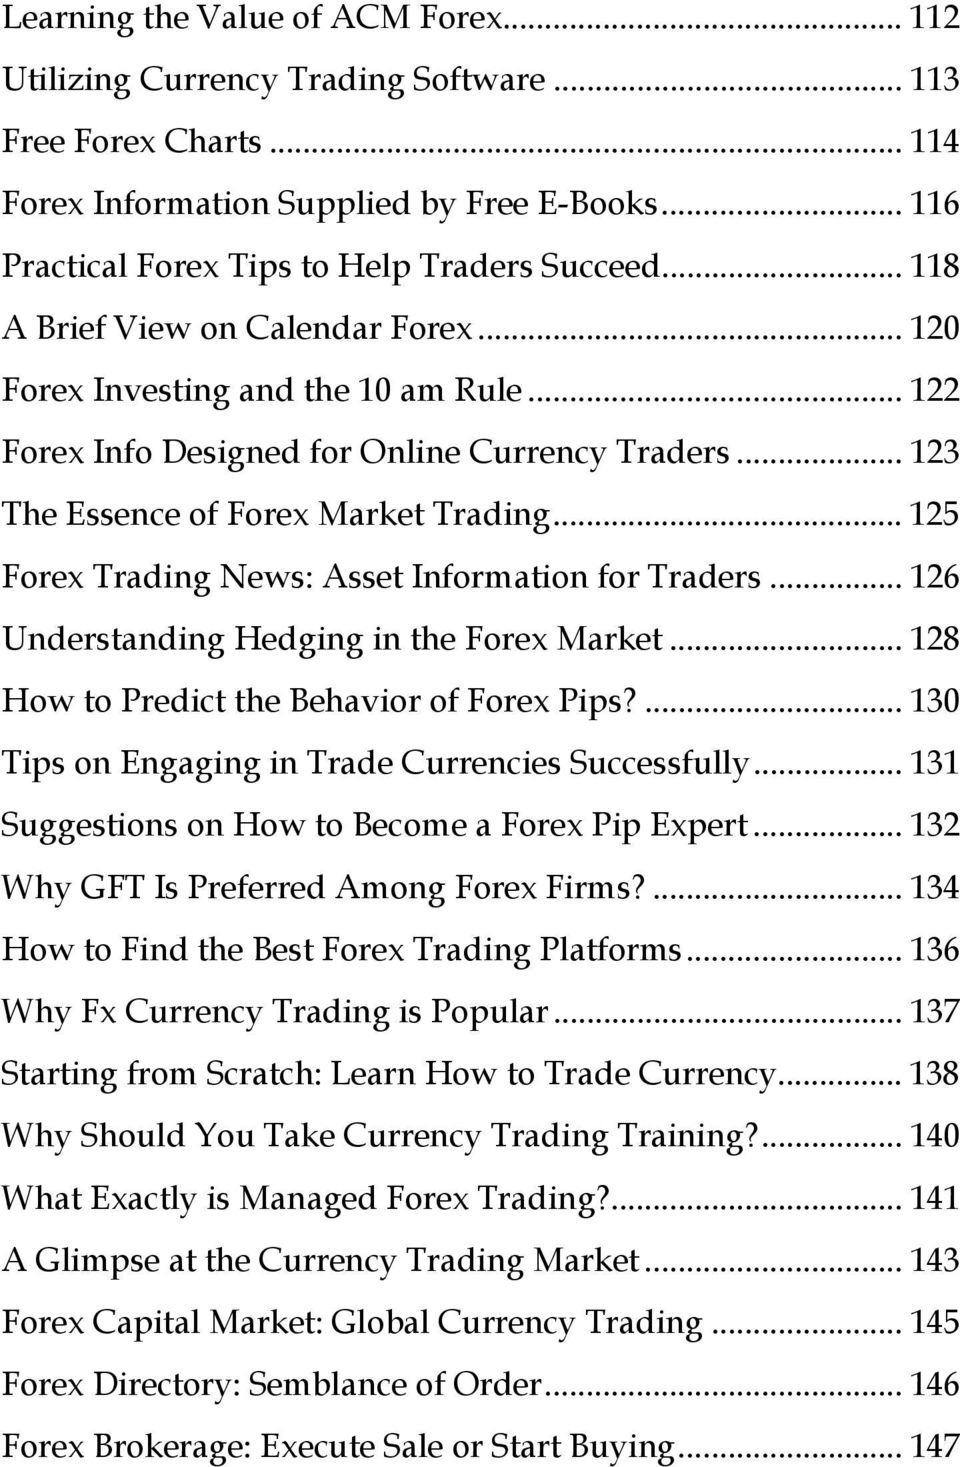 .. 125 Forex Trading News: Asset Information for Traders... 126 Understanding Hedging in the Forex Market... 128 How to Predict the Behavior of Forex Pips?